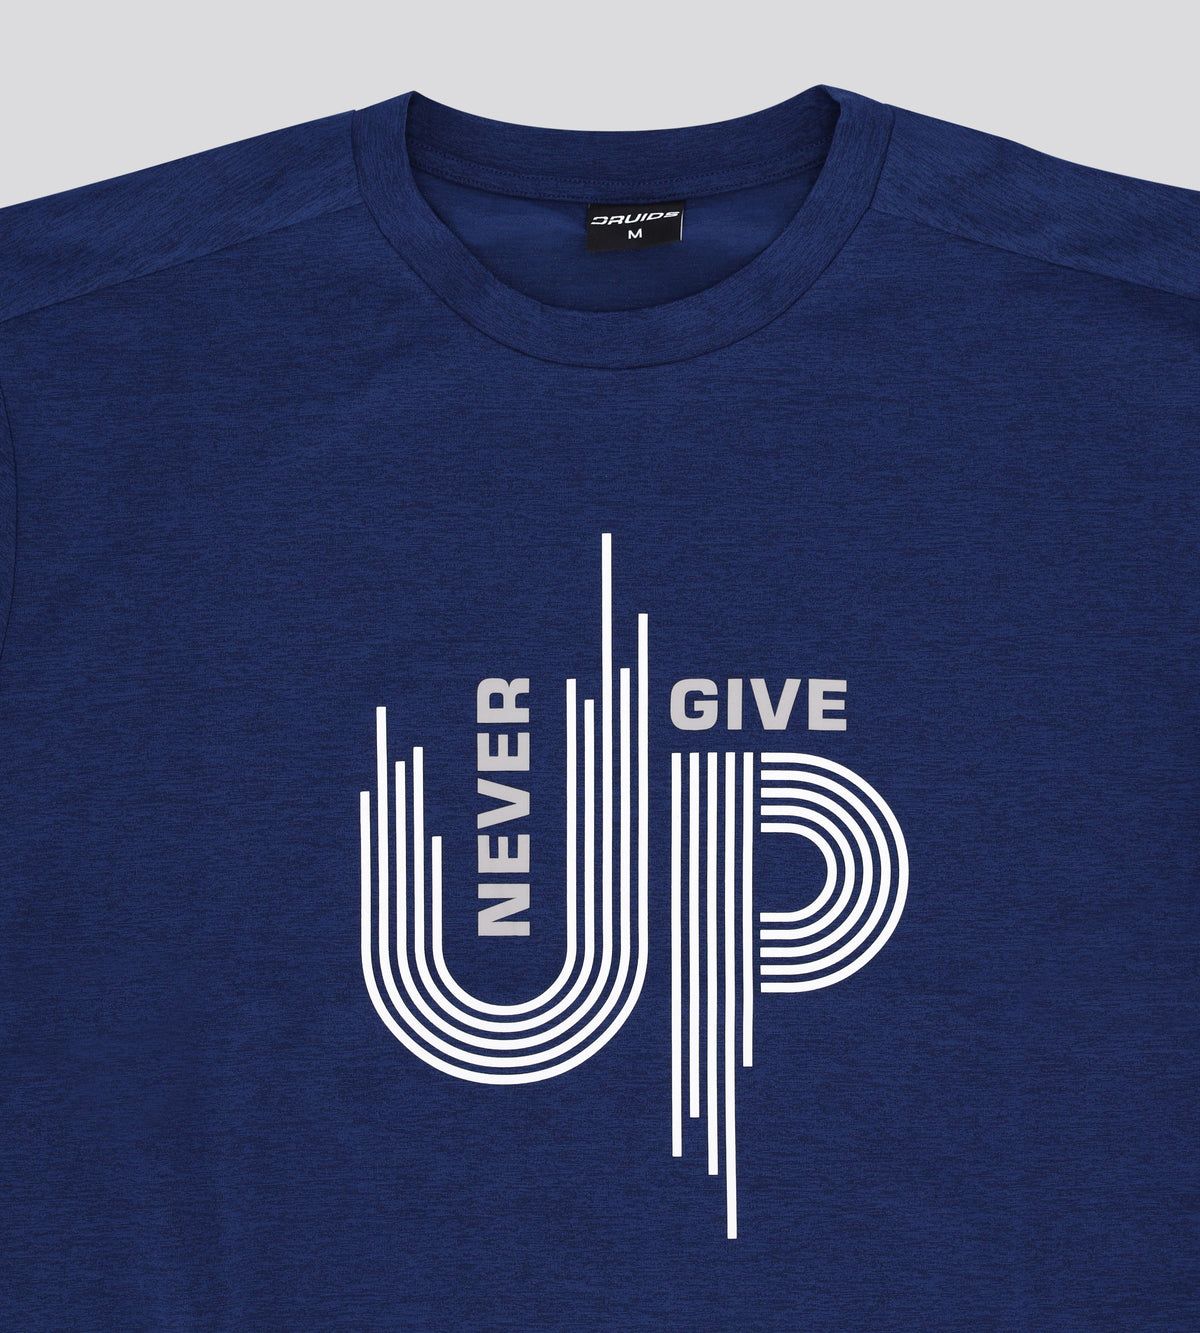 MEN'S NEVER GIVE UP T-SHIRT - NAVY